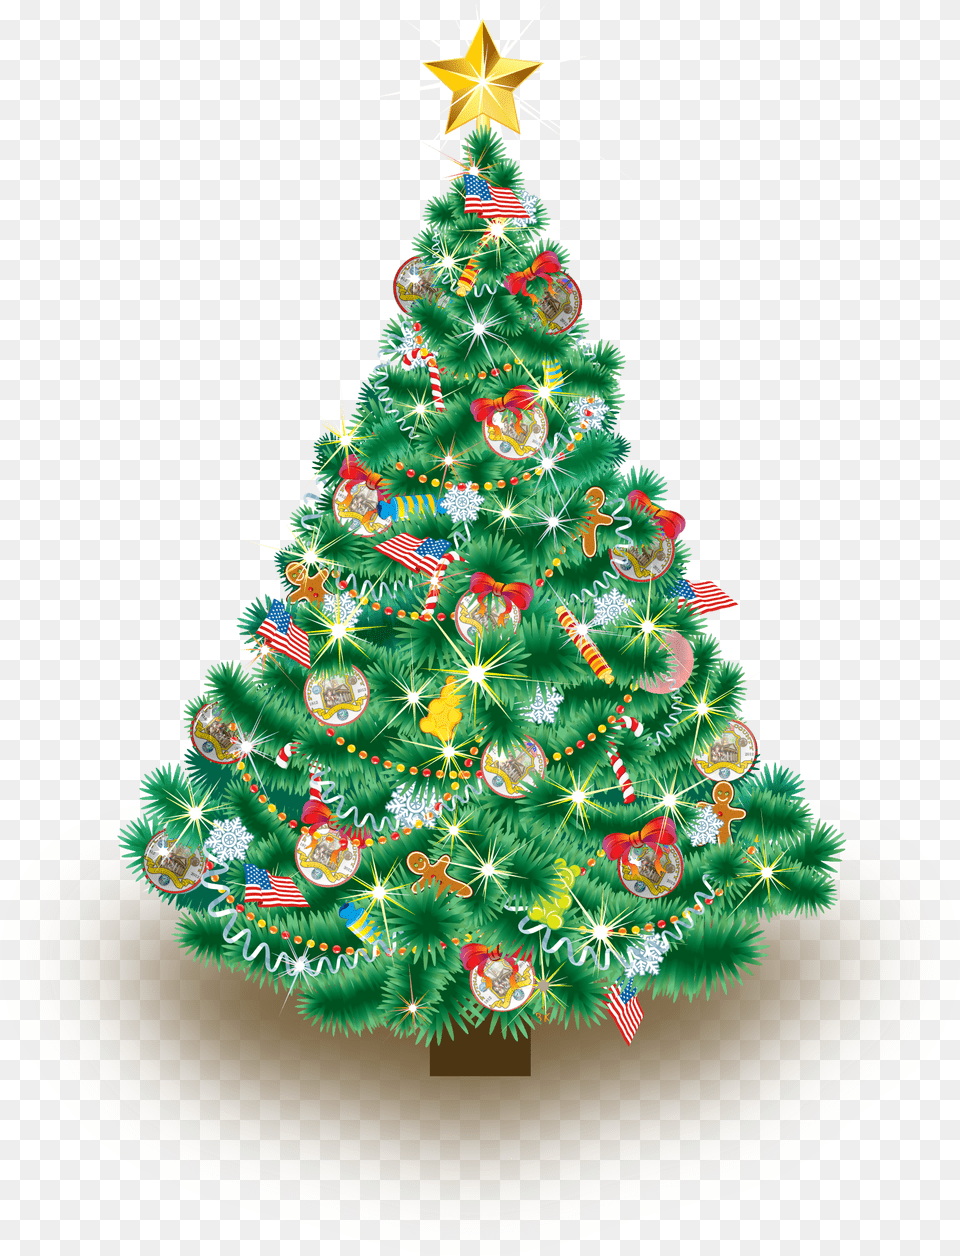 Merry Christmas And A Happy New Year 2014 The Year I39m Not Trying To Ruin Your Christmas But A Few, Plant, Tree, Christmas Decorations, Festival Png